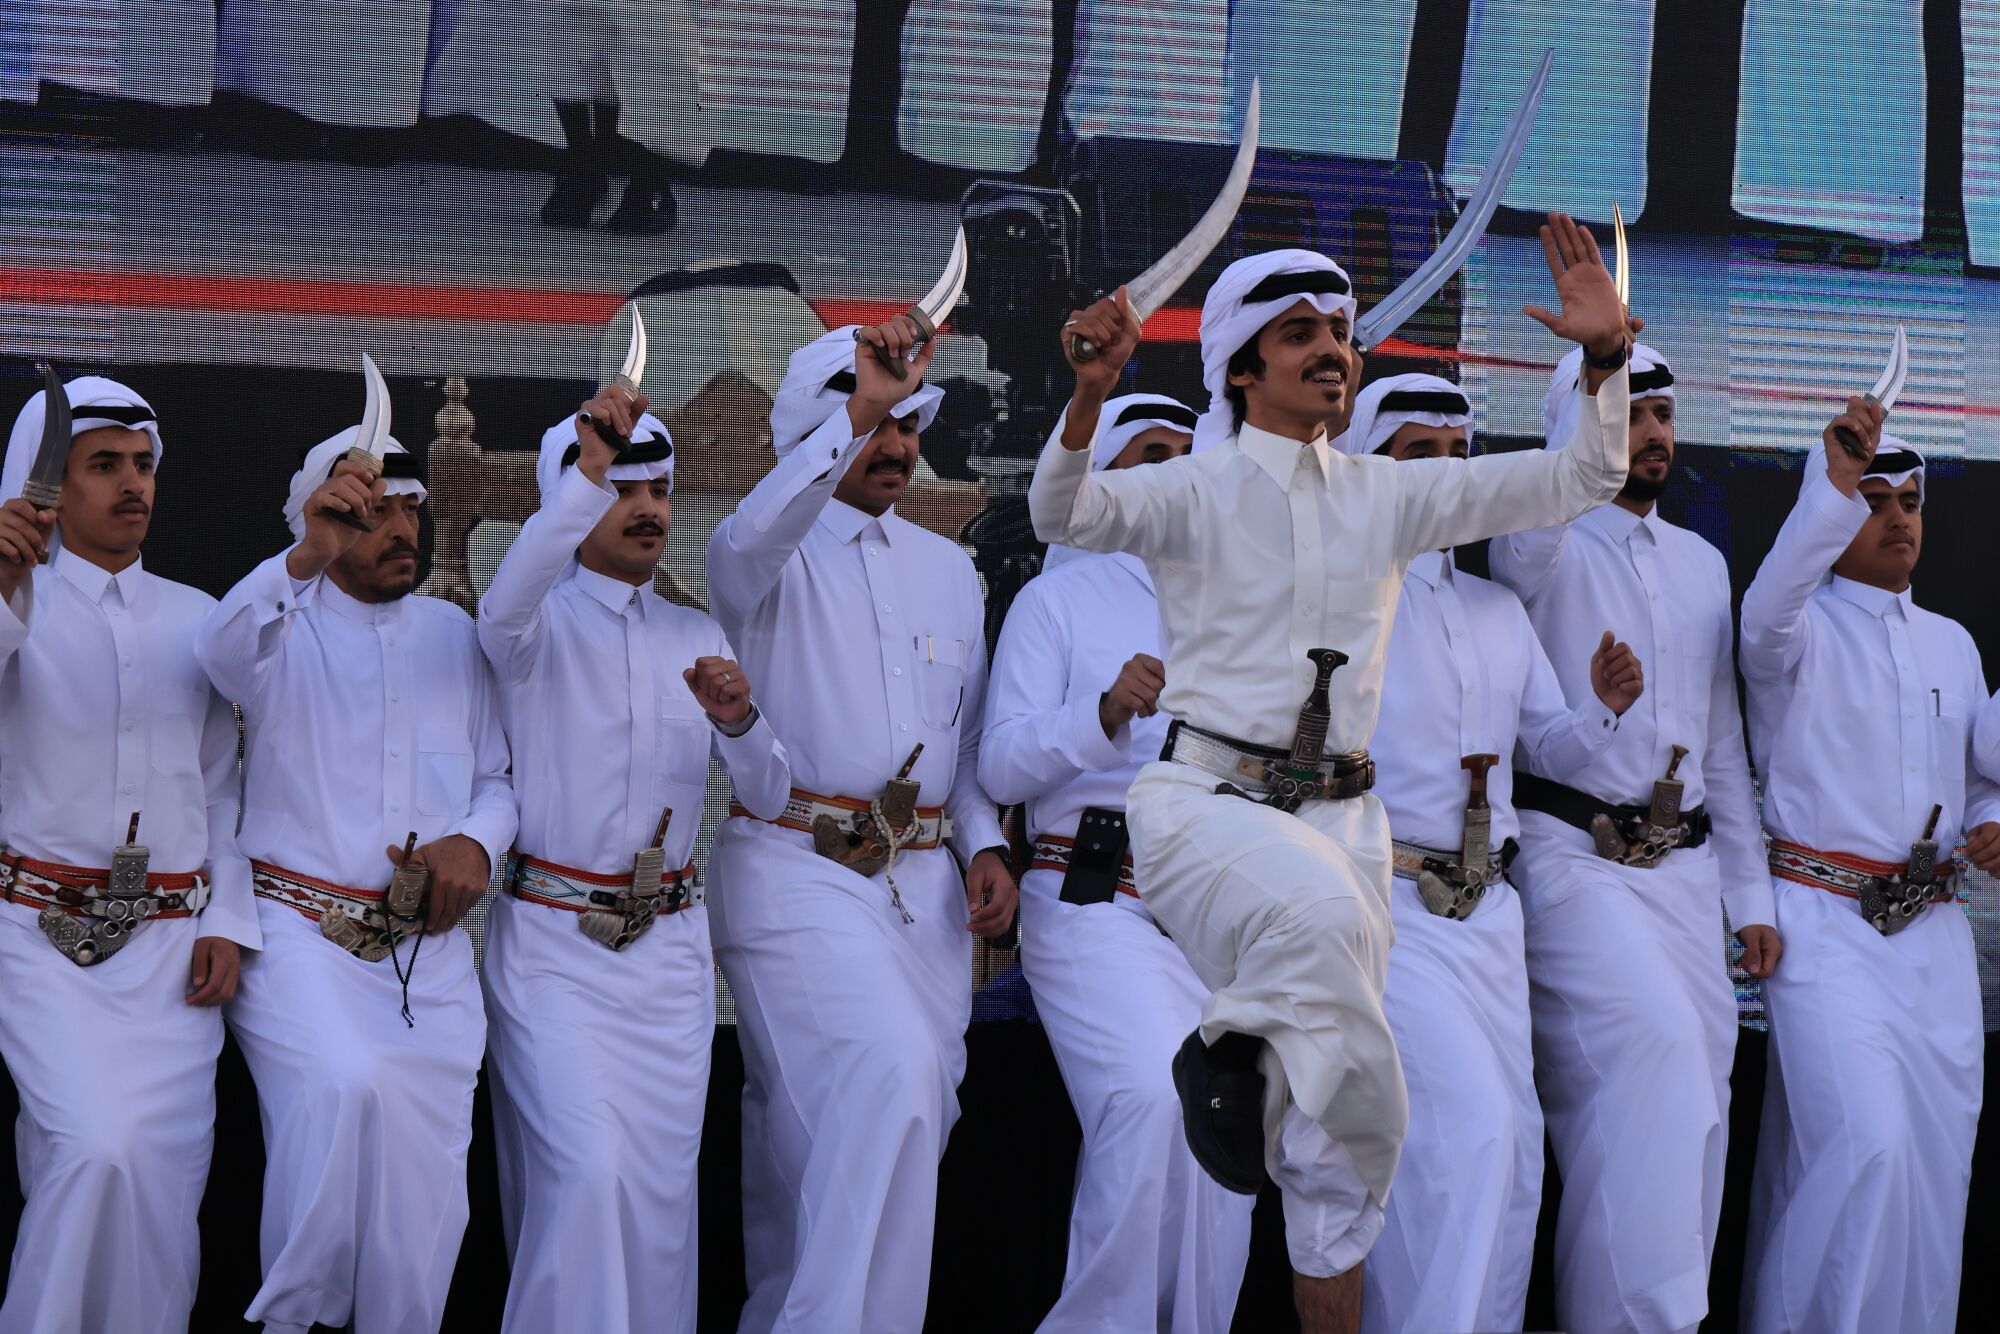 Men holding curved blades perform a traditional Saudi dance.